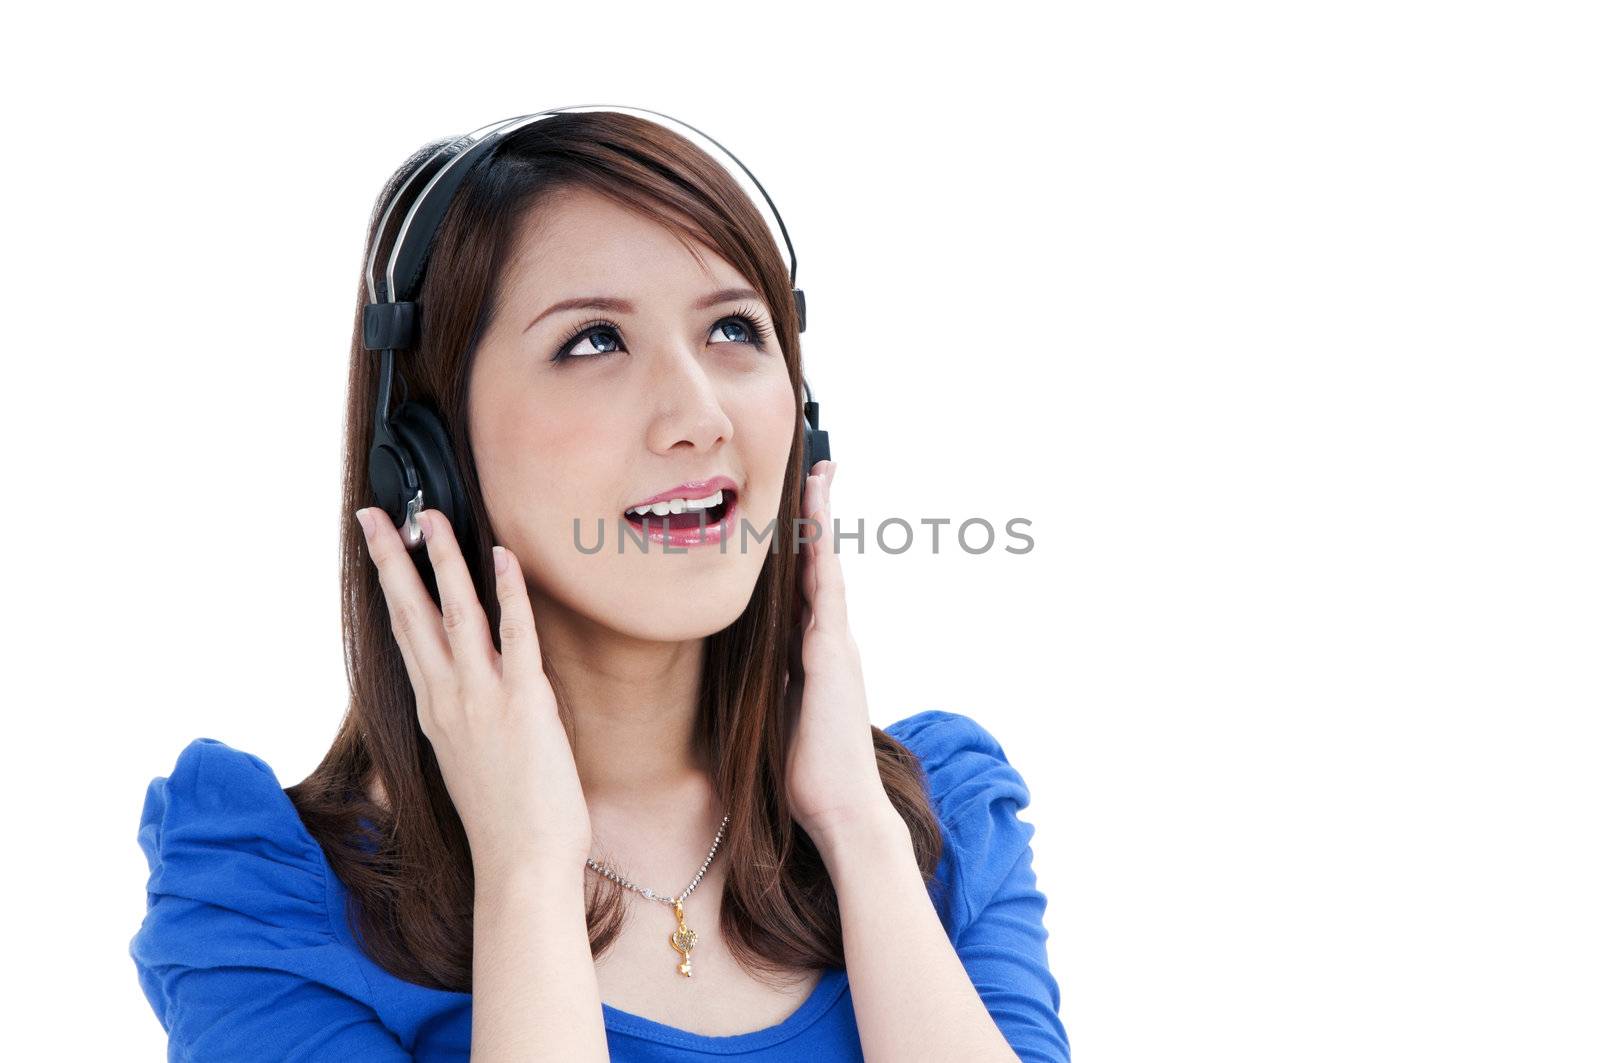 Portrait of a beautiful young woman listening to music over white background.